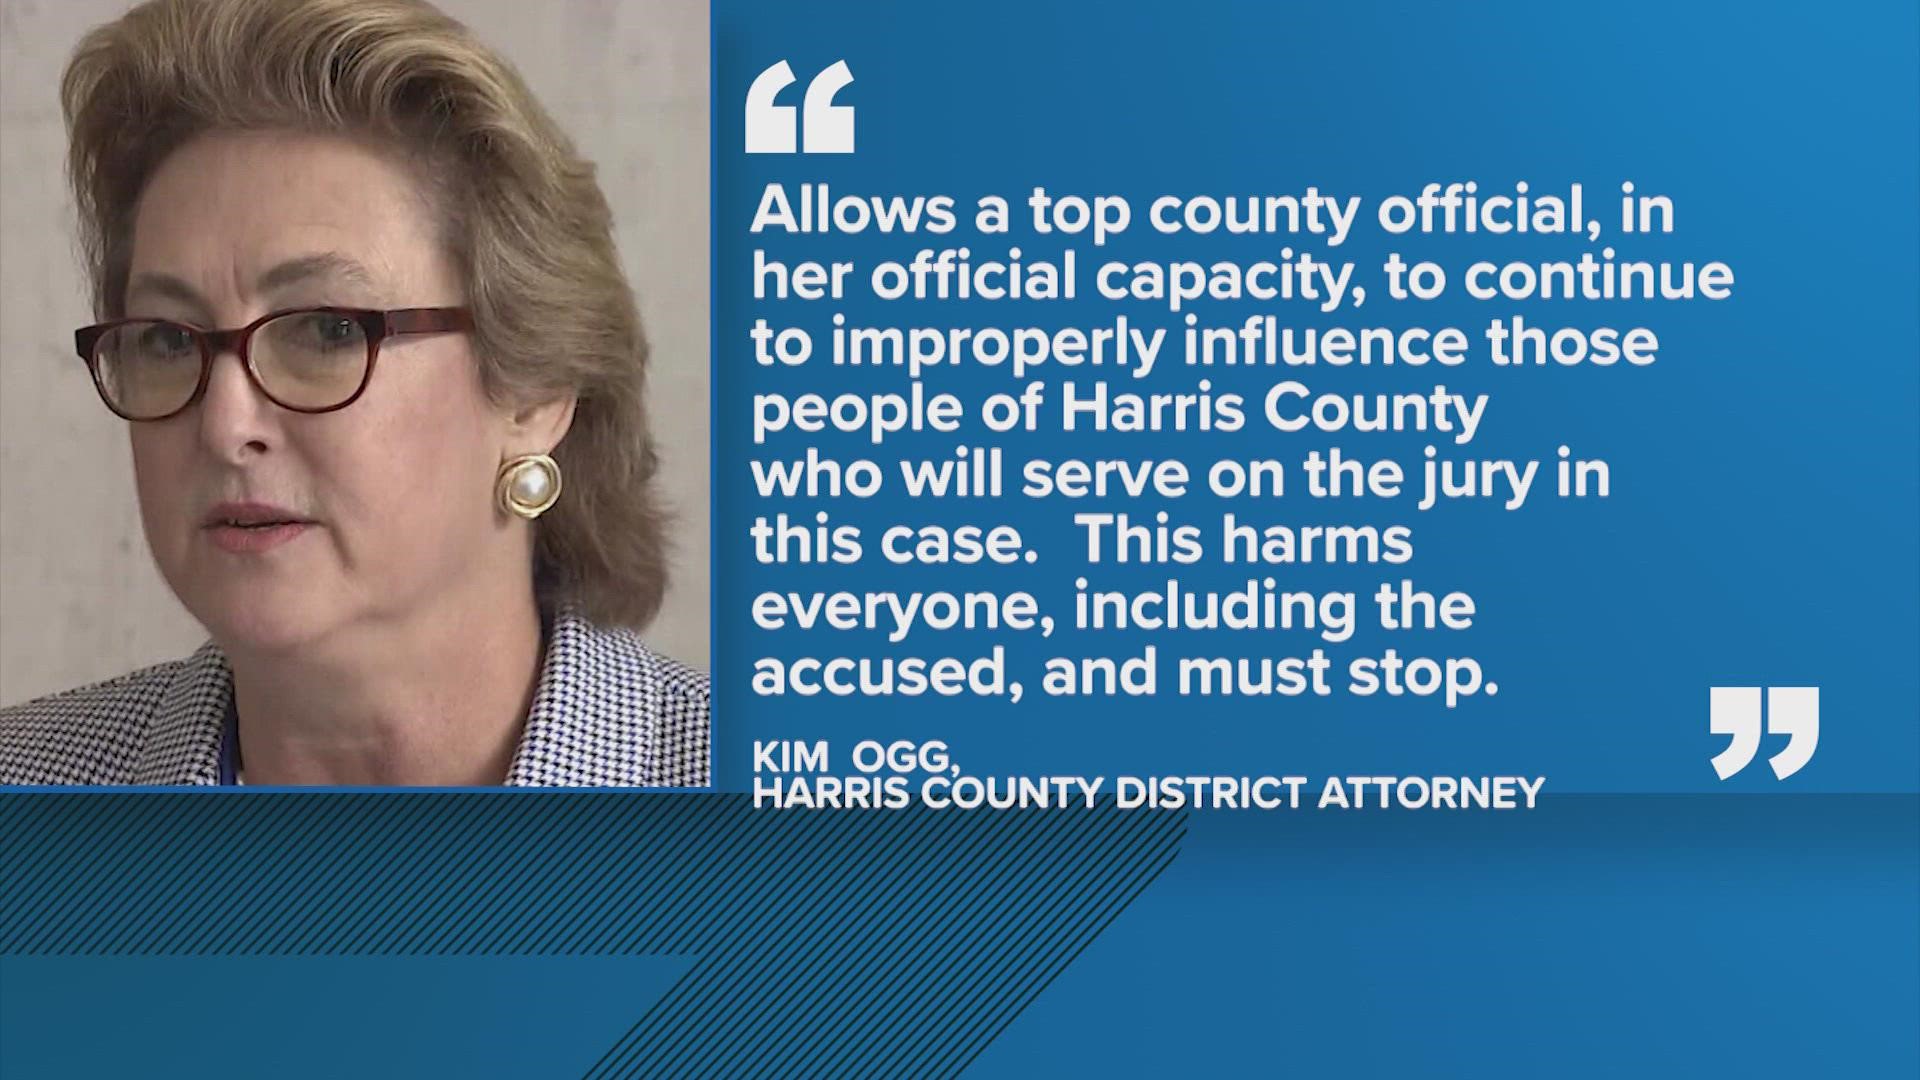 After the felony indictments of three staffers in Harris County Judge Lina Hidalgo's office, the exchanges continue between two of the county's top elected officials